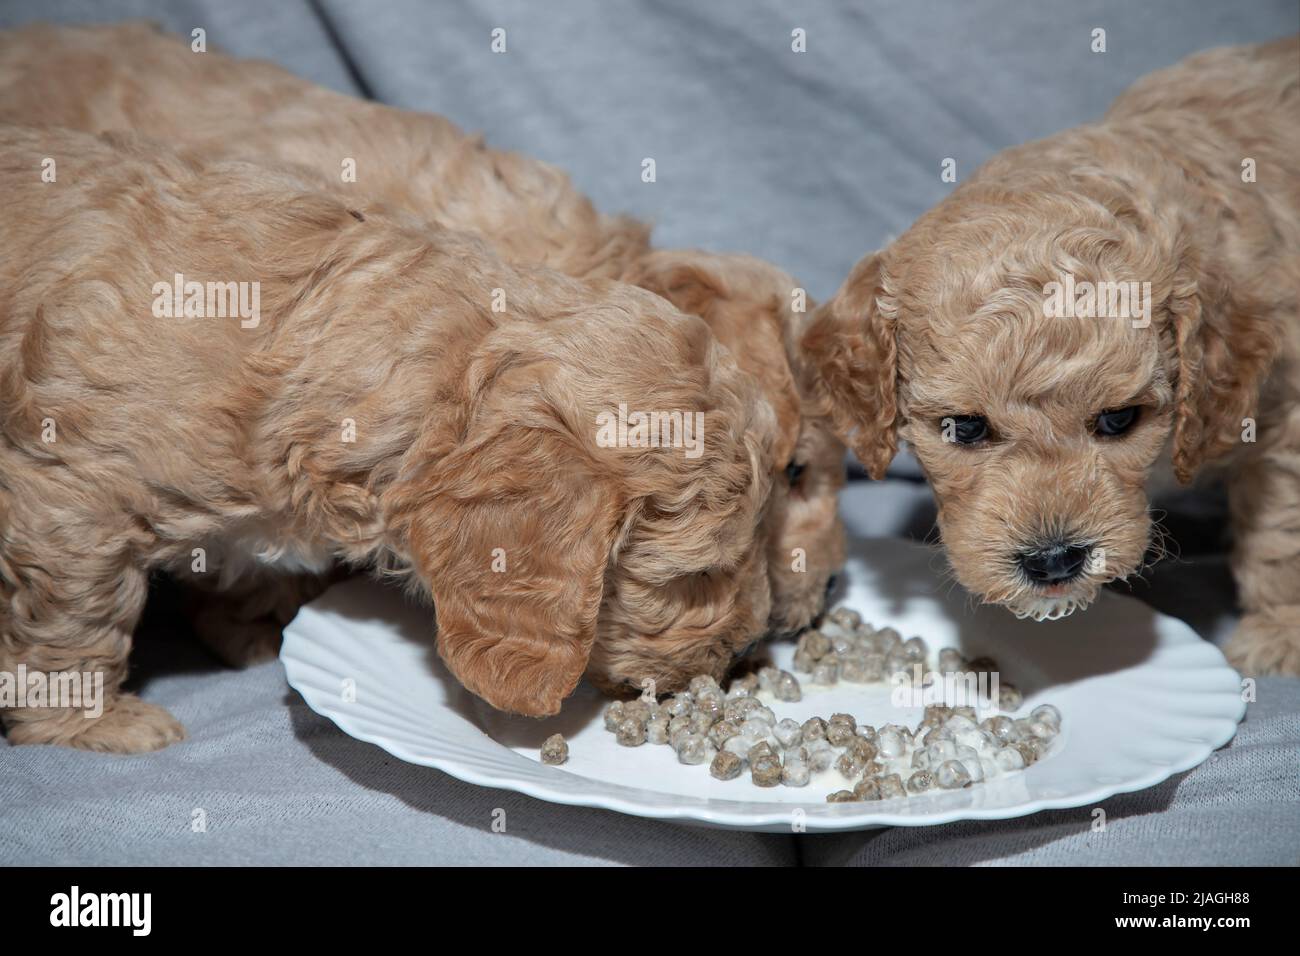 Five-week-old Poochon (Poodle & Bichon mix) puppies eating from a plate Stock Photo